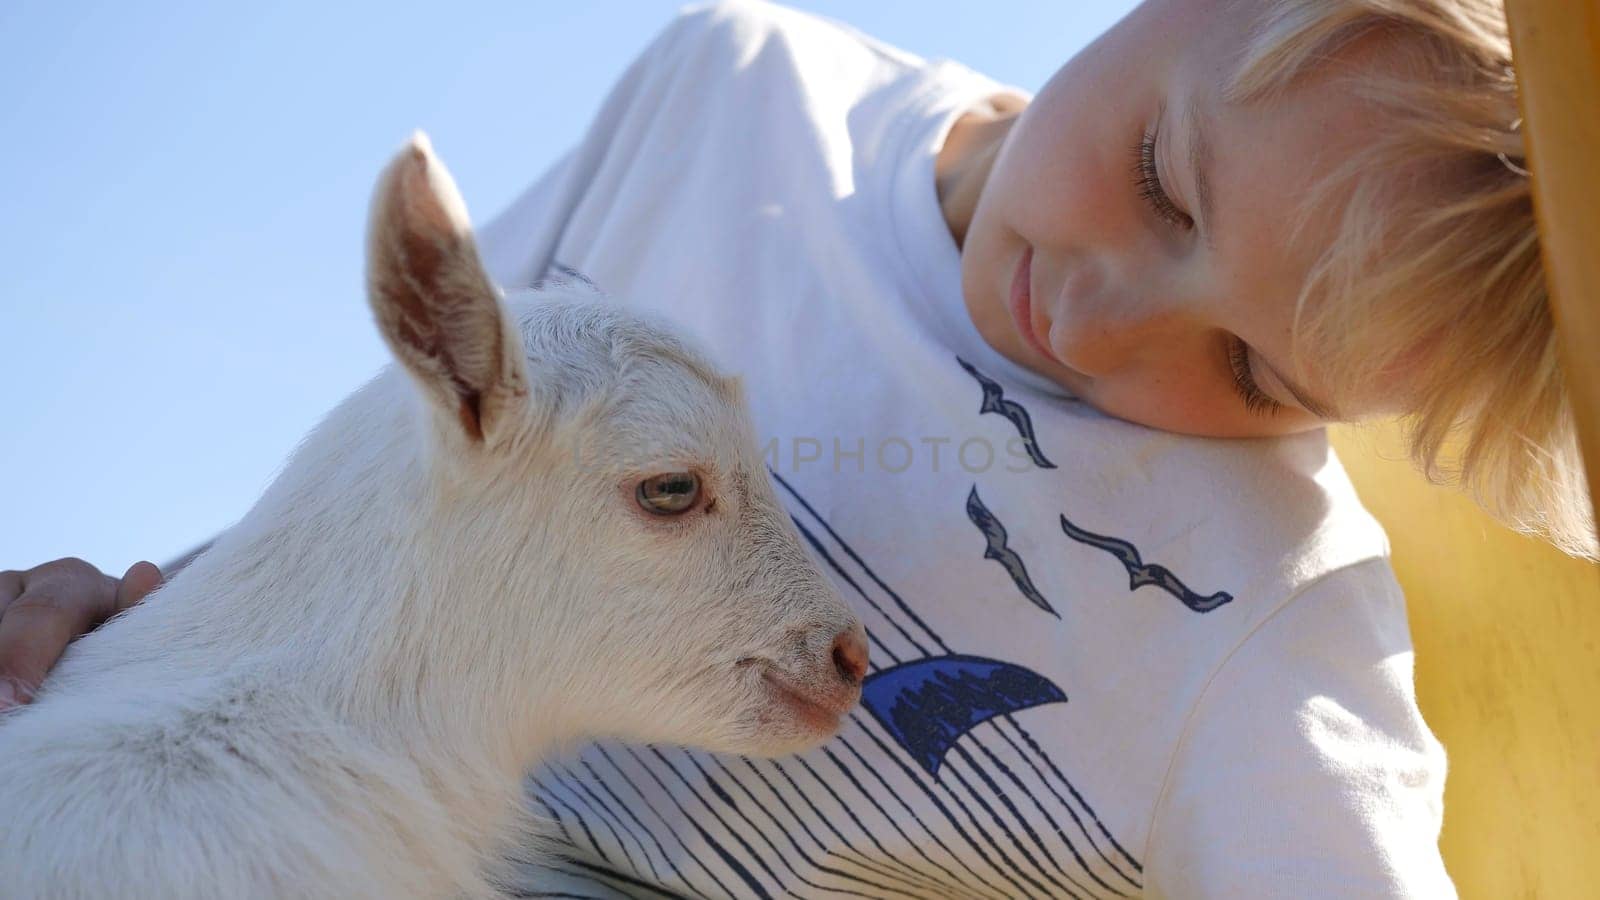 The little boy is stroking the little goat. by DovidPro